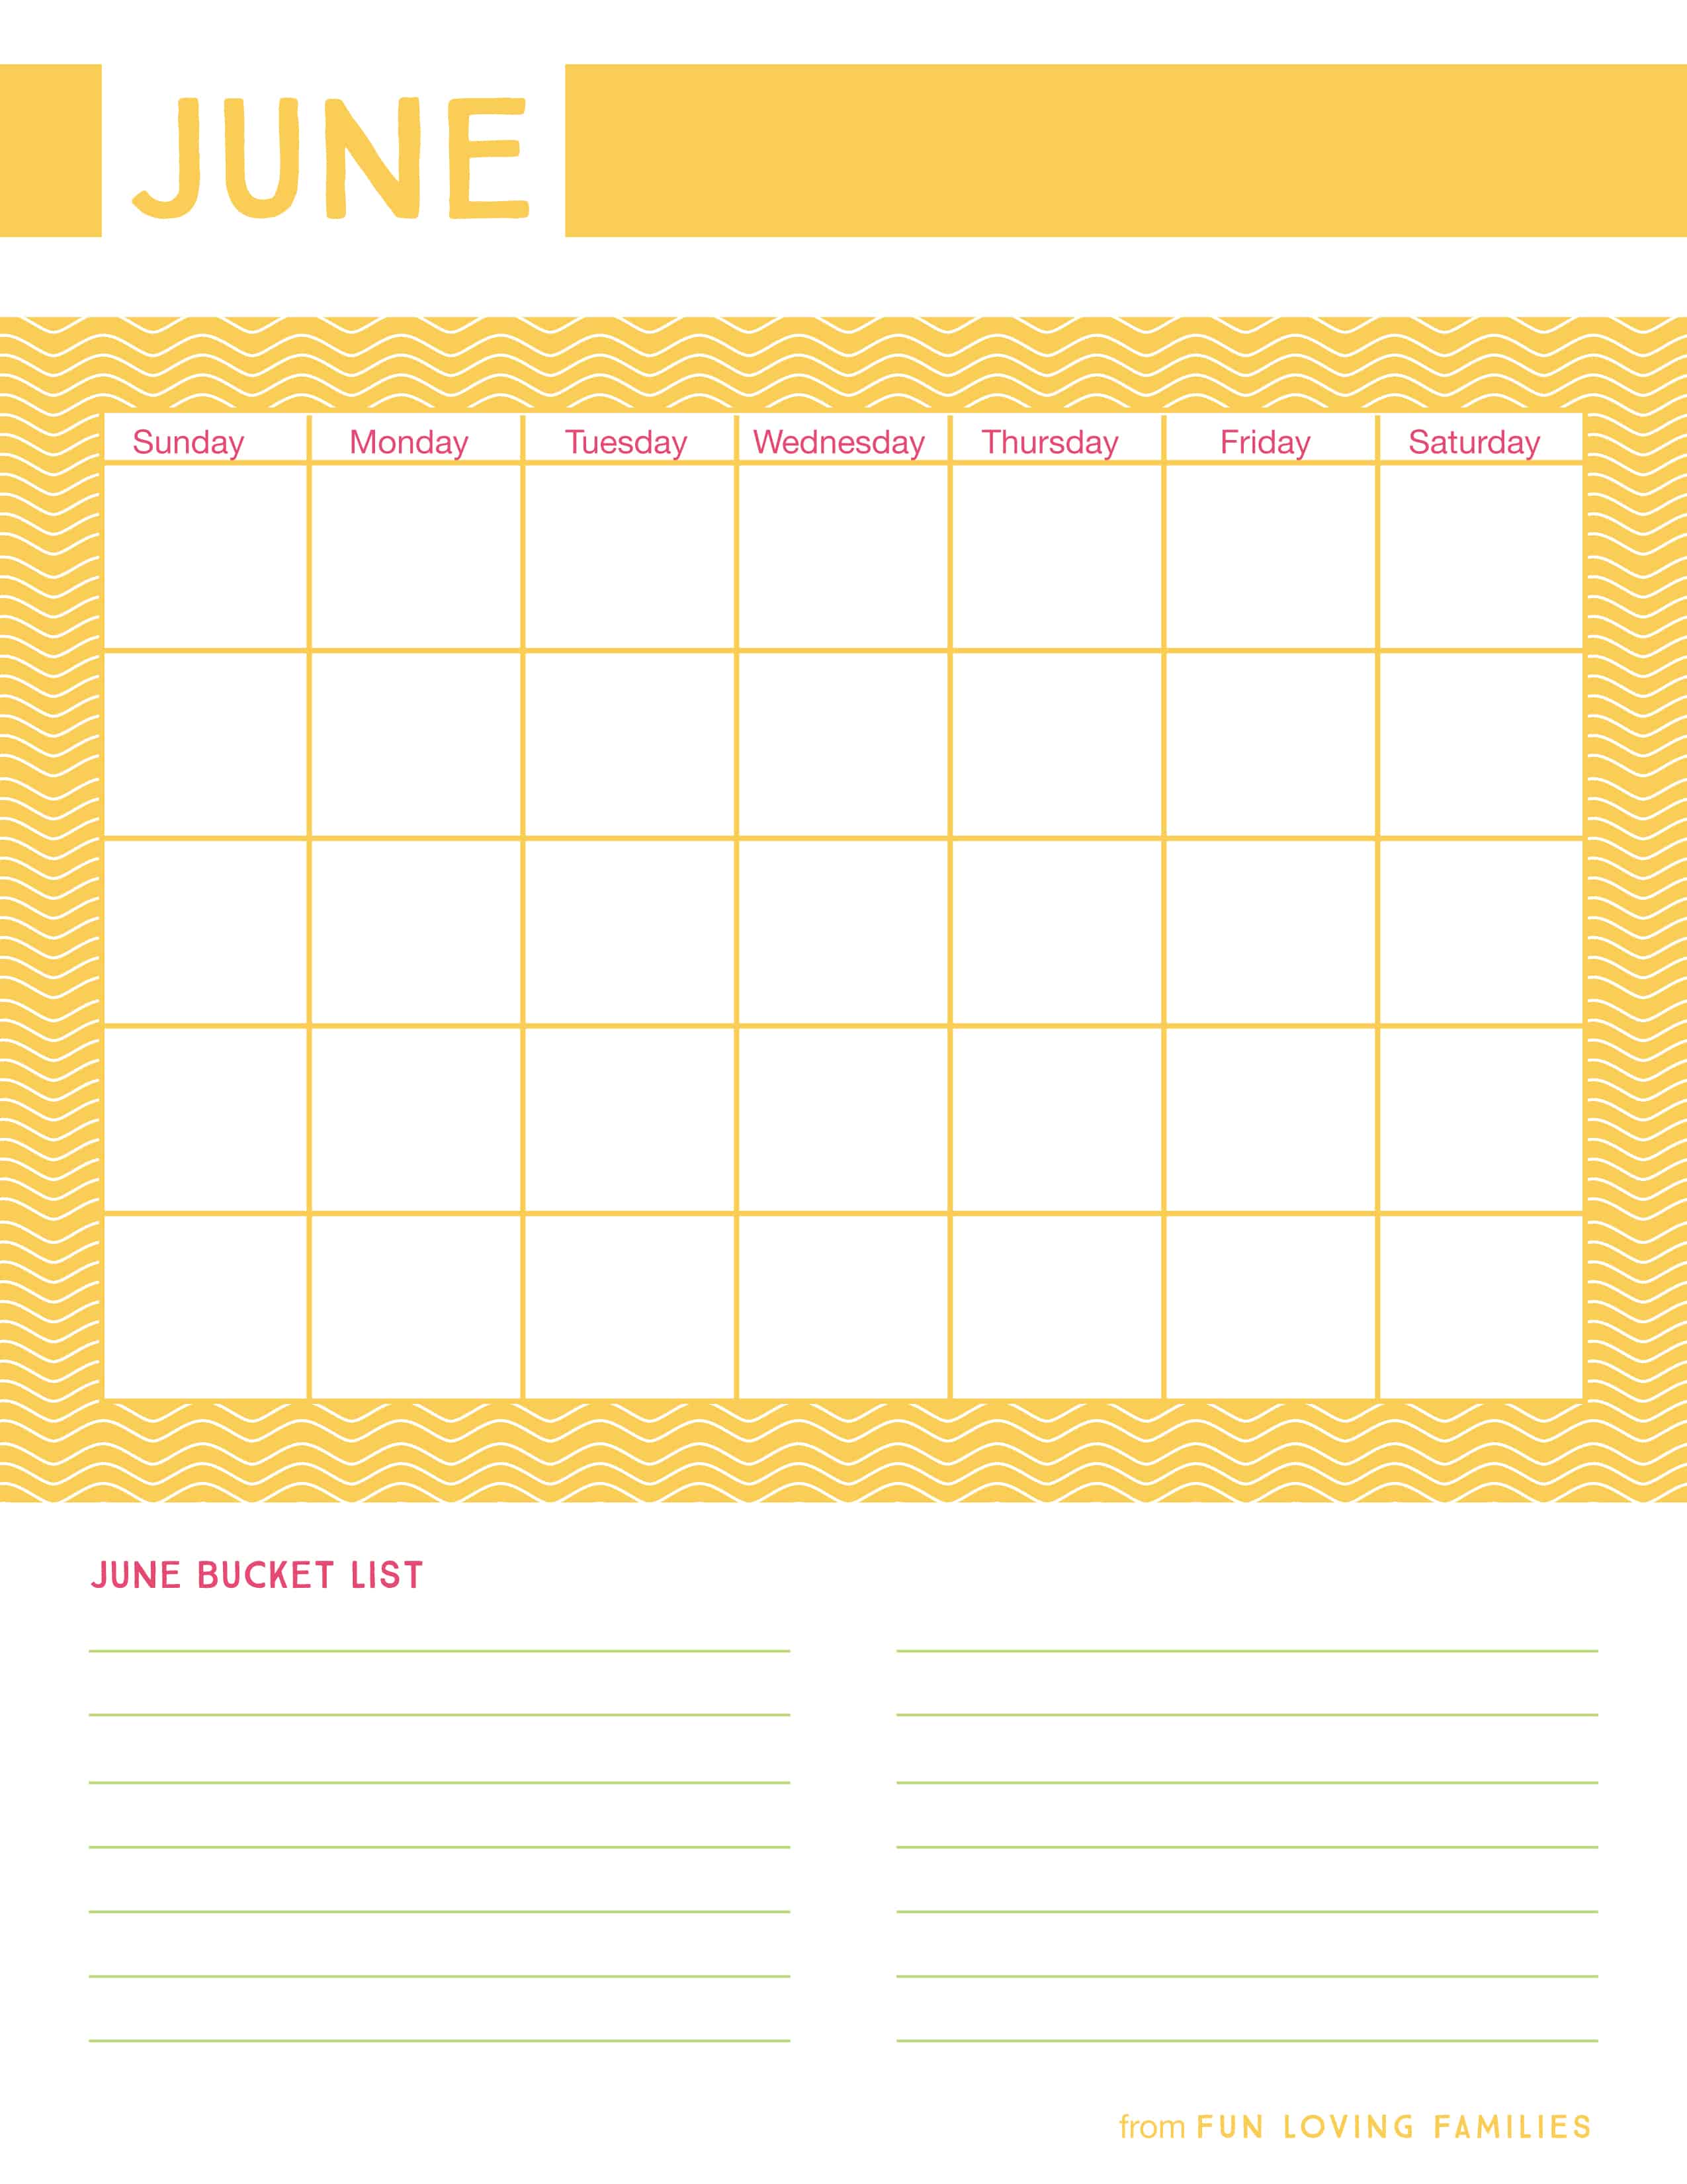 Get the most out of your Summer with the kids with our free Summer planning printables. 18 Summers go by fast...make the most of them!